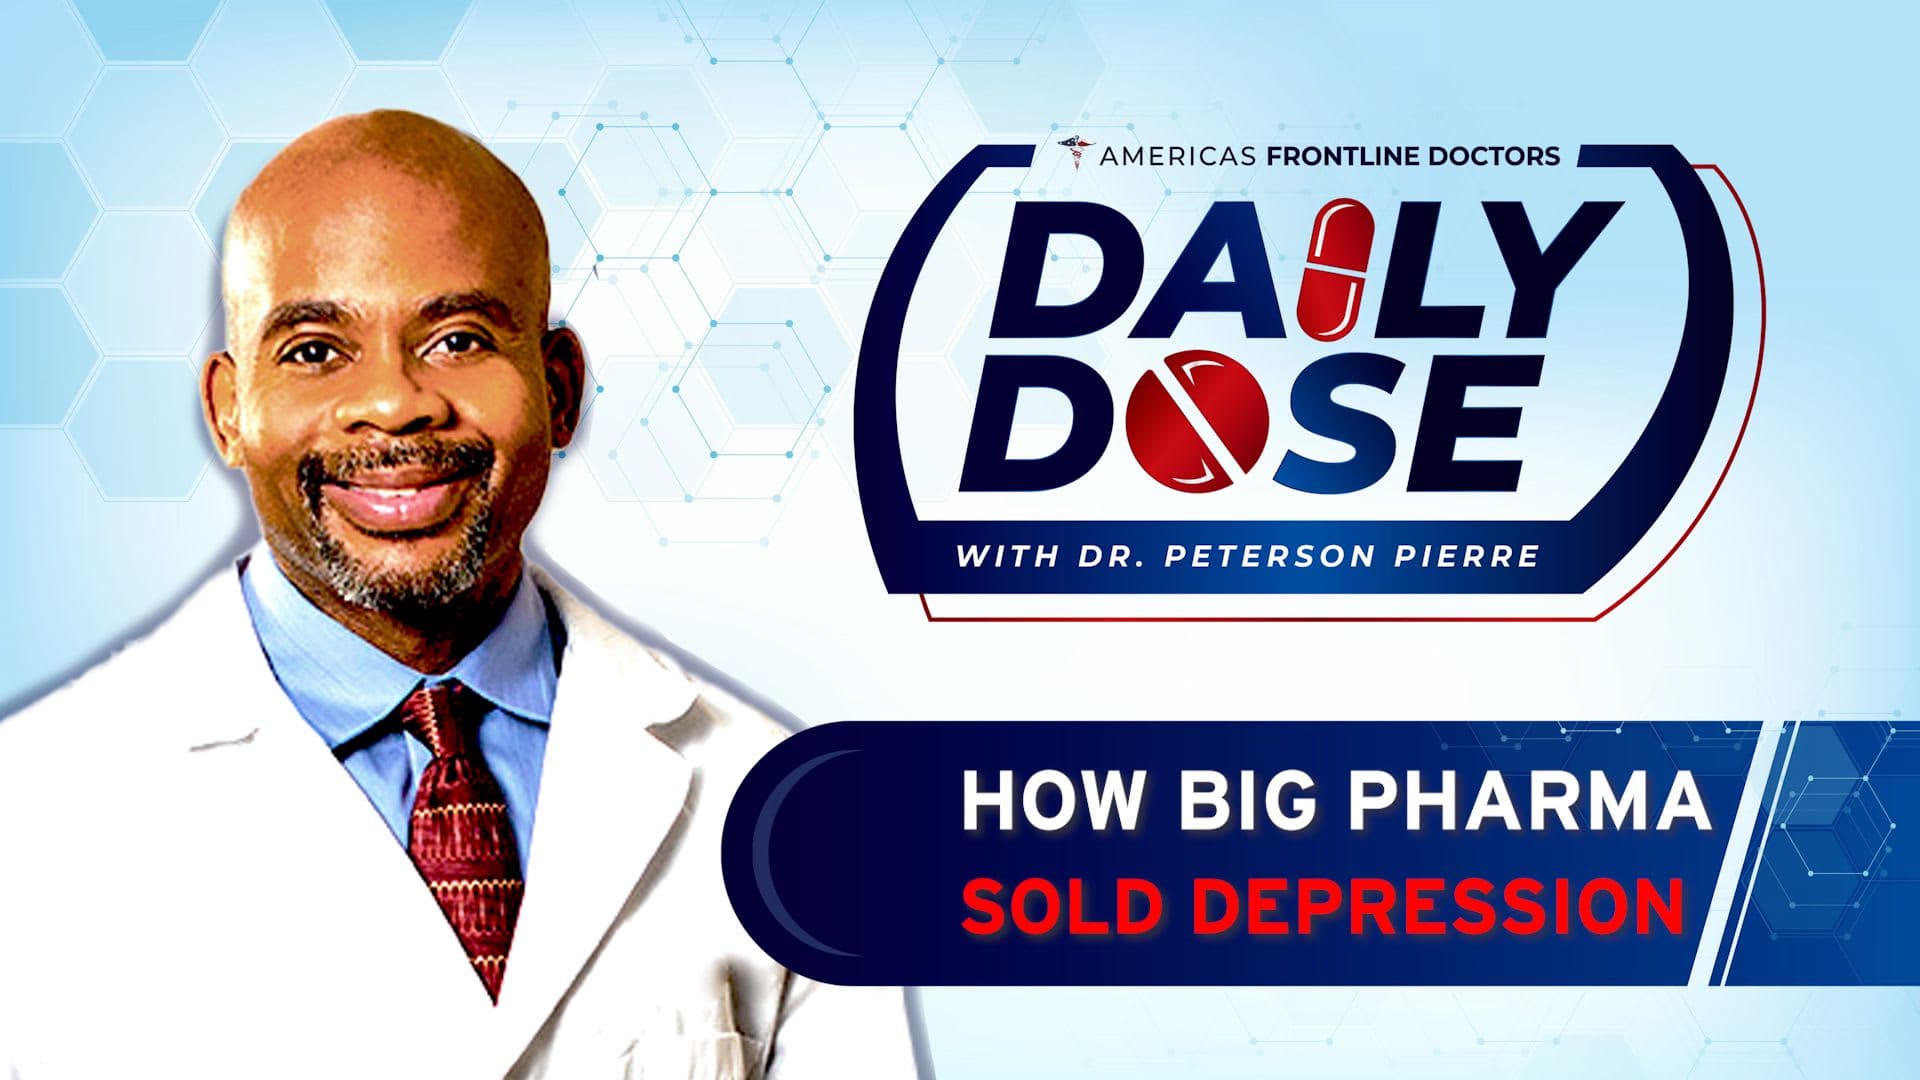 Daily Dose: 'How Big Pharma Sold Depression' with Dr. Peterson Pierre